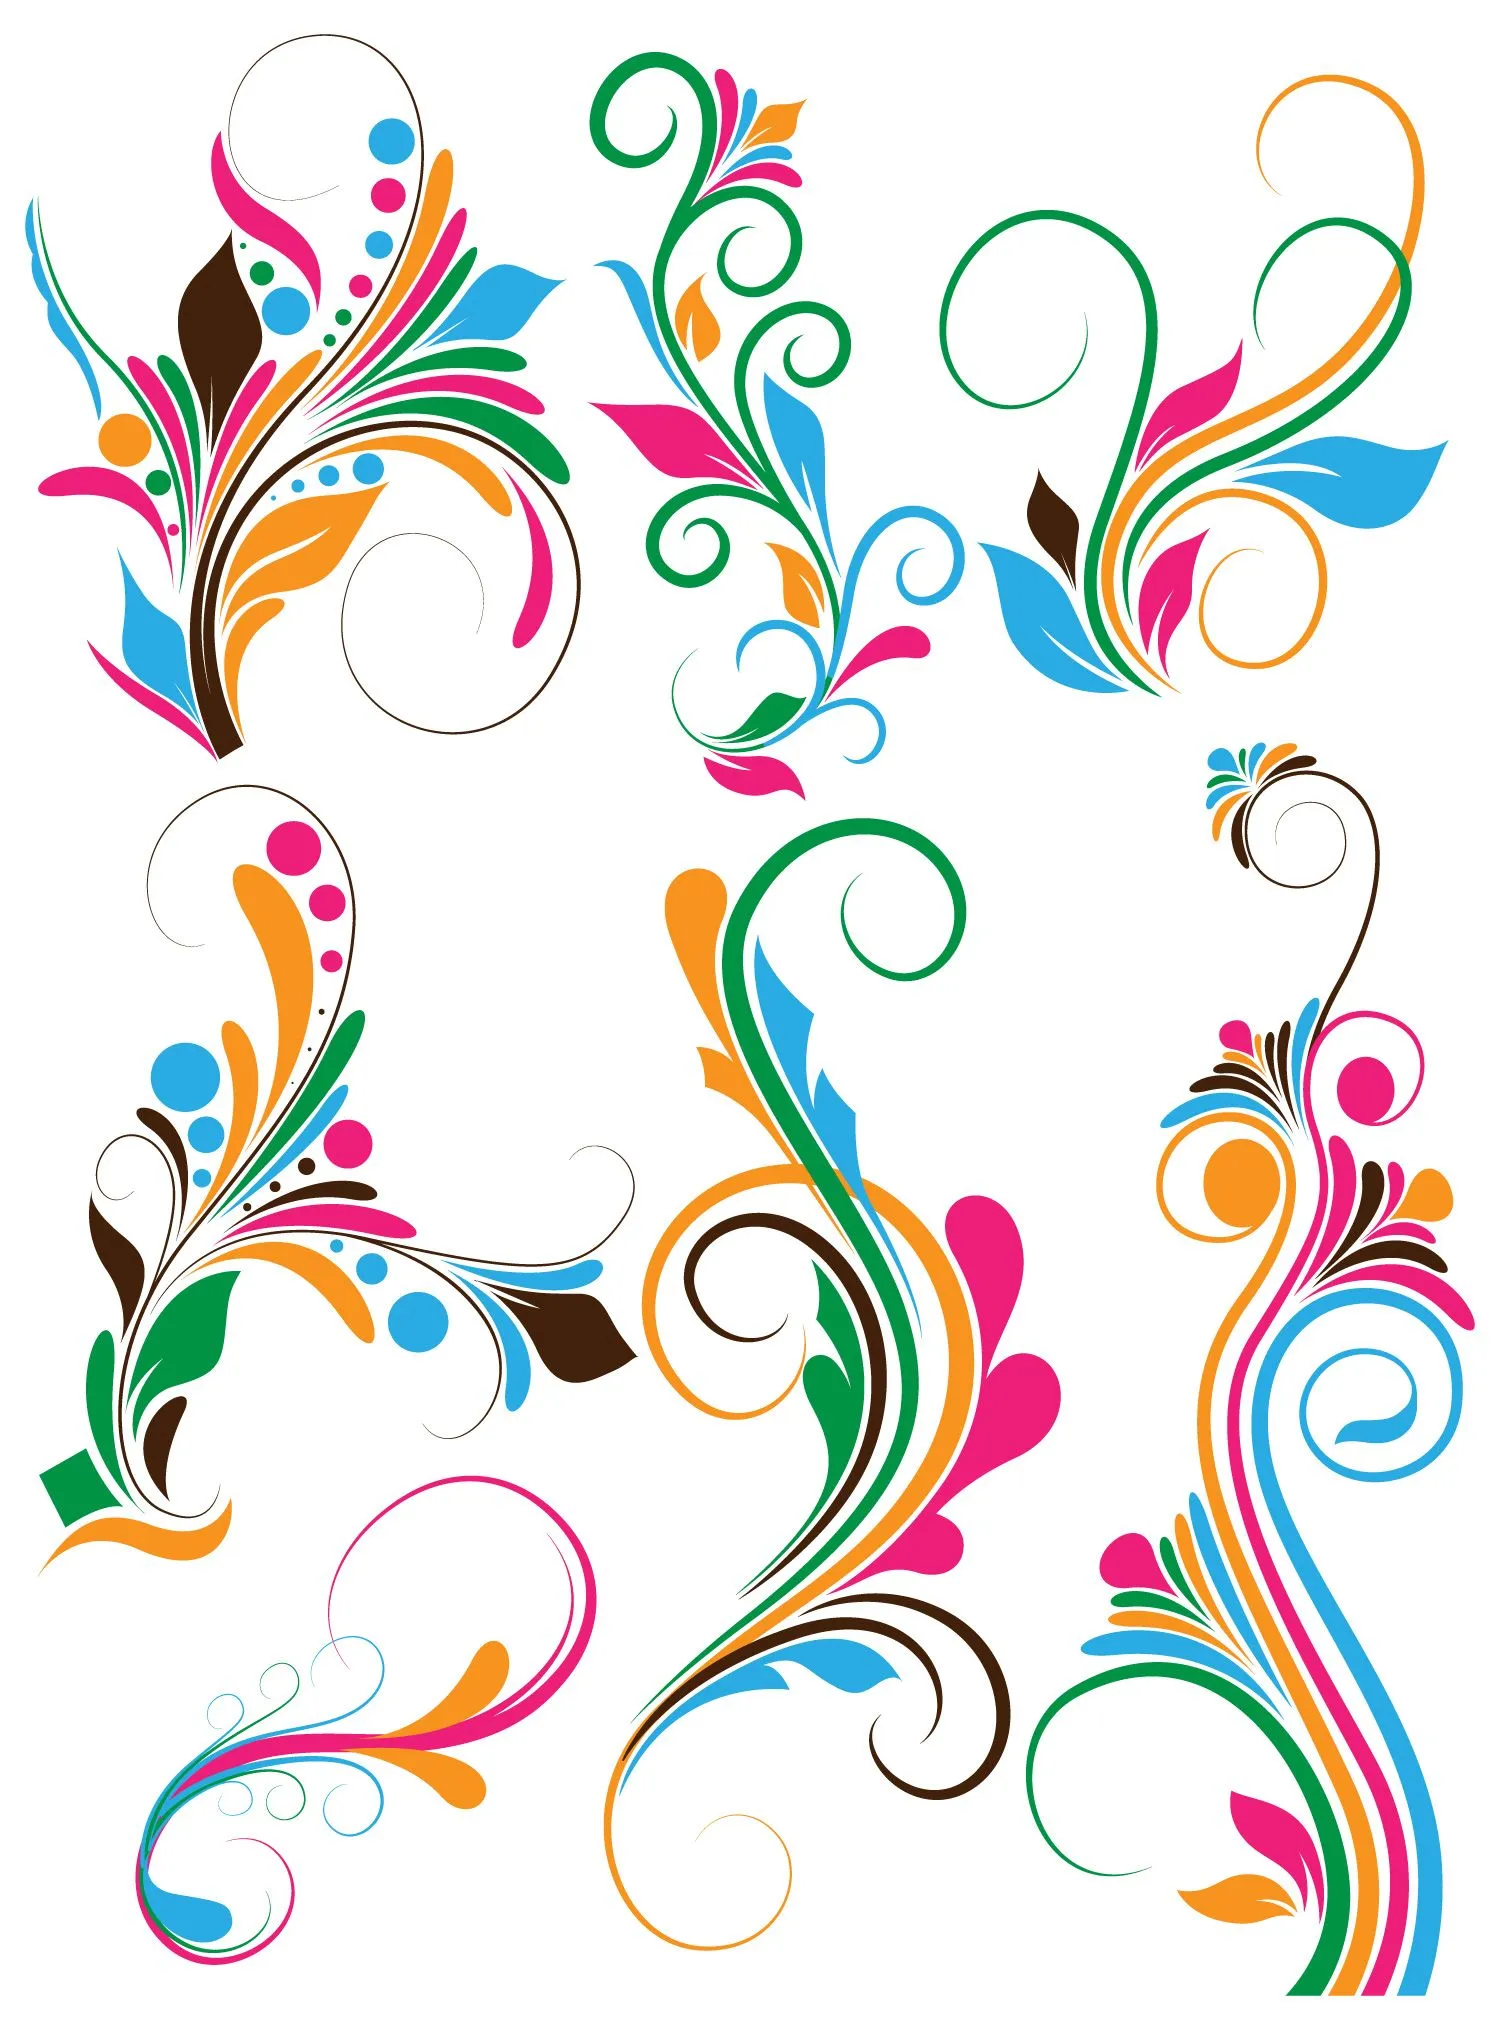 Flourish swirls Vectors, Brushes, PNG, Shapes & Picture | Free ...